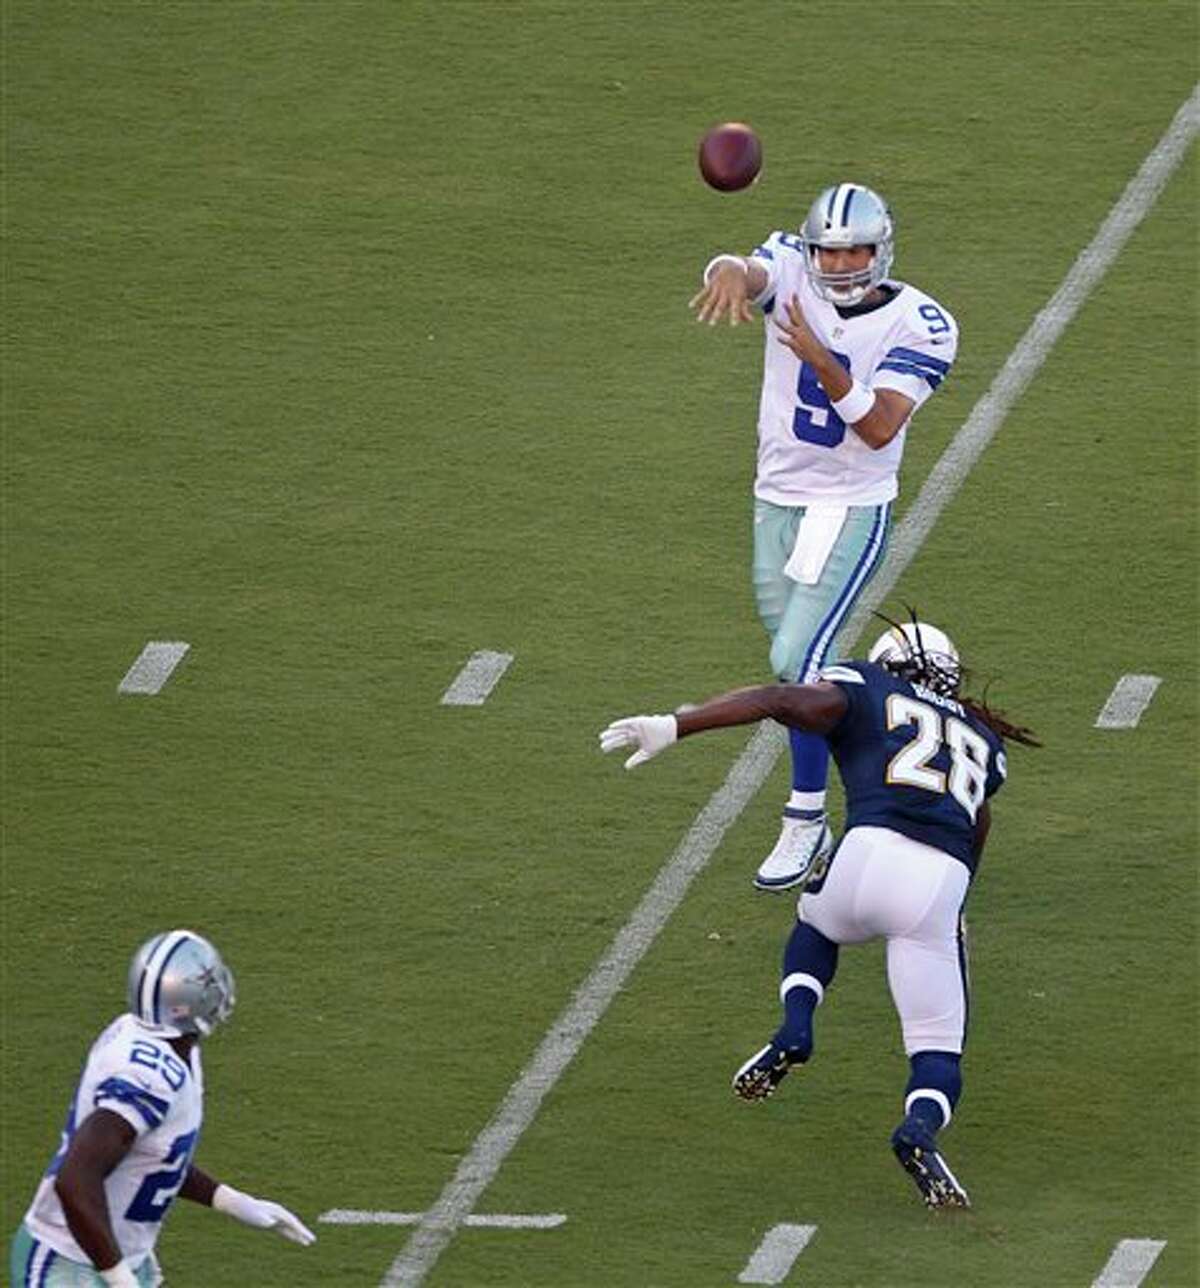 Dallas Cowboys quarterback Tony Romo throws a pass over San Diego Chargers defensive back Atari Bigby to running back DeMarco Murray in the flat during the first quarter of a NFL preseason football game Saturday, Aug. 18, 2012 in San Diego. (AP Photo/Lenny Ignelzi)